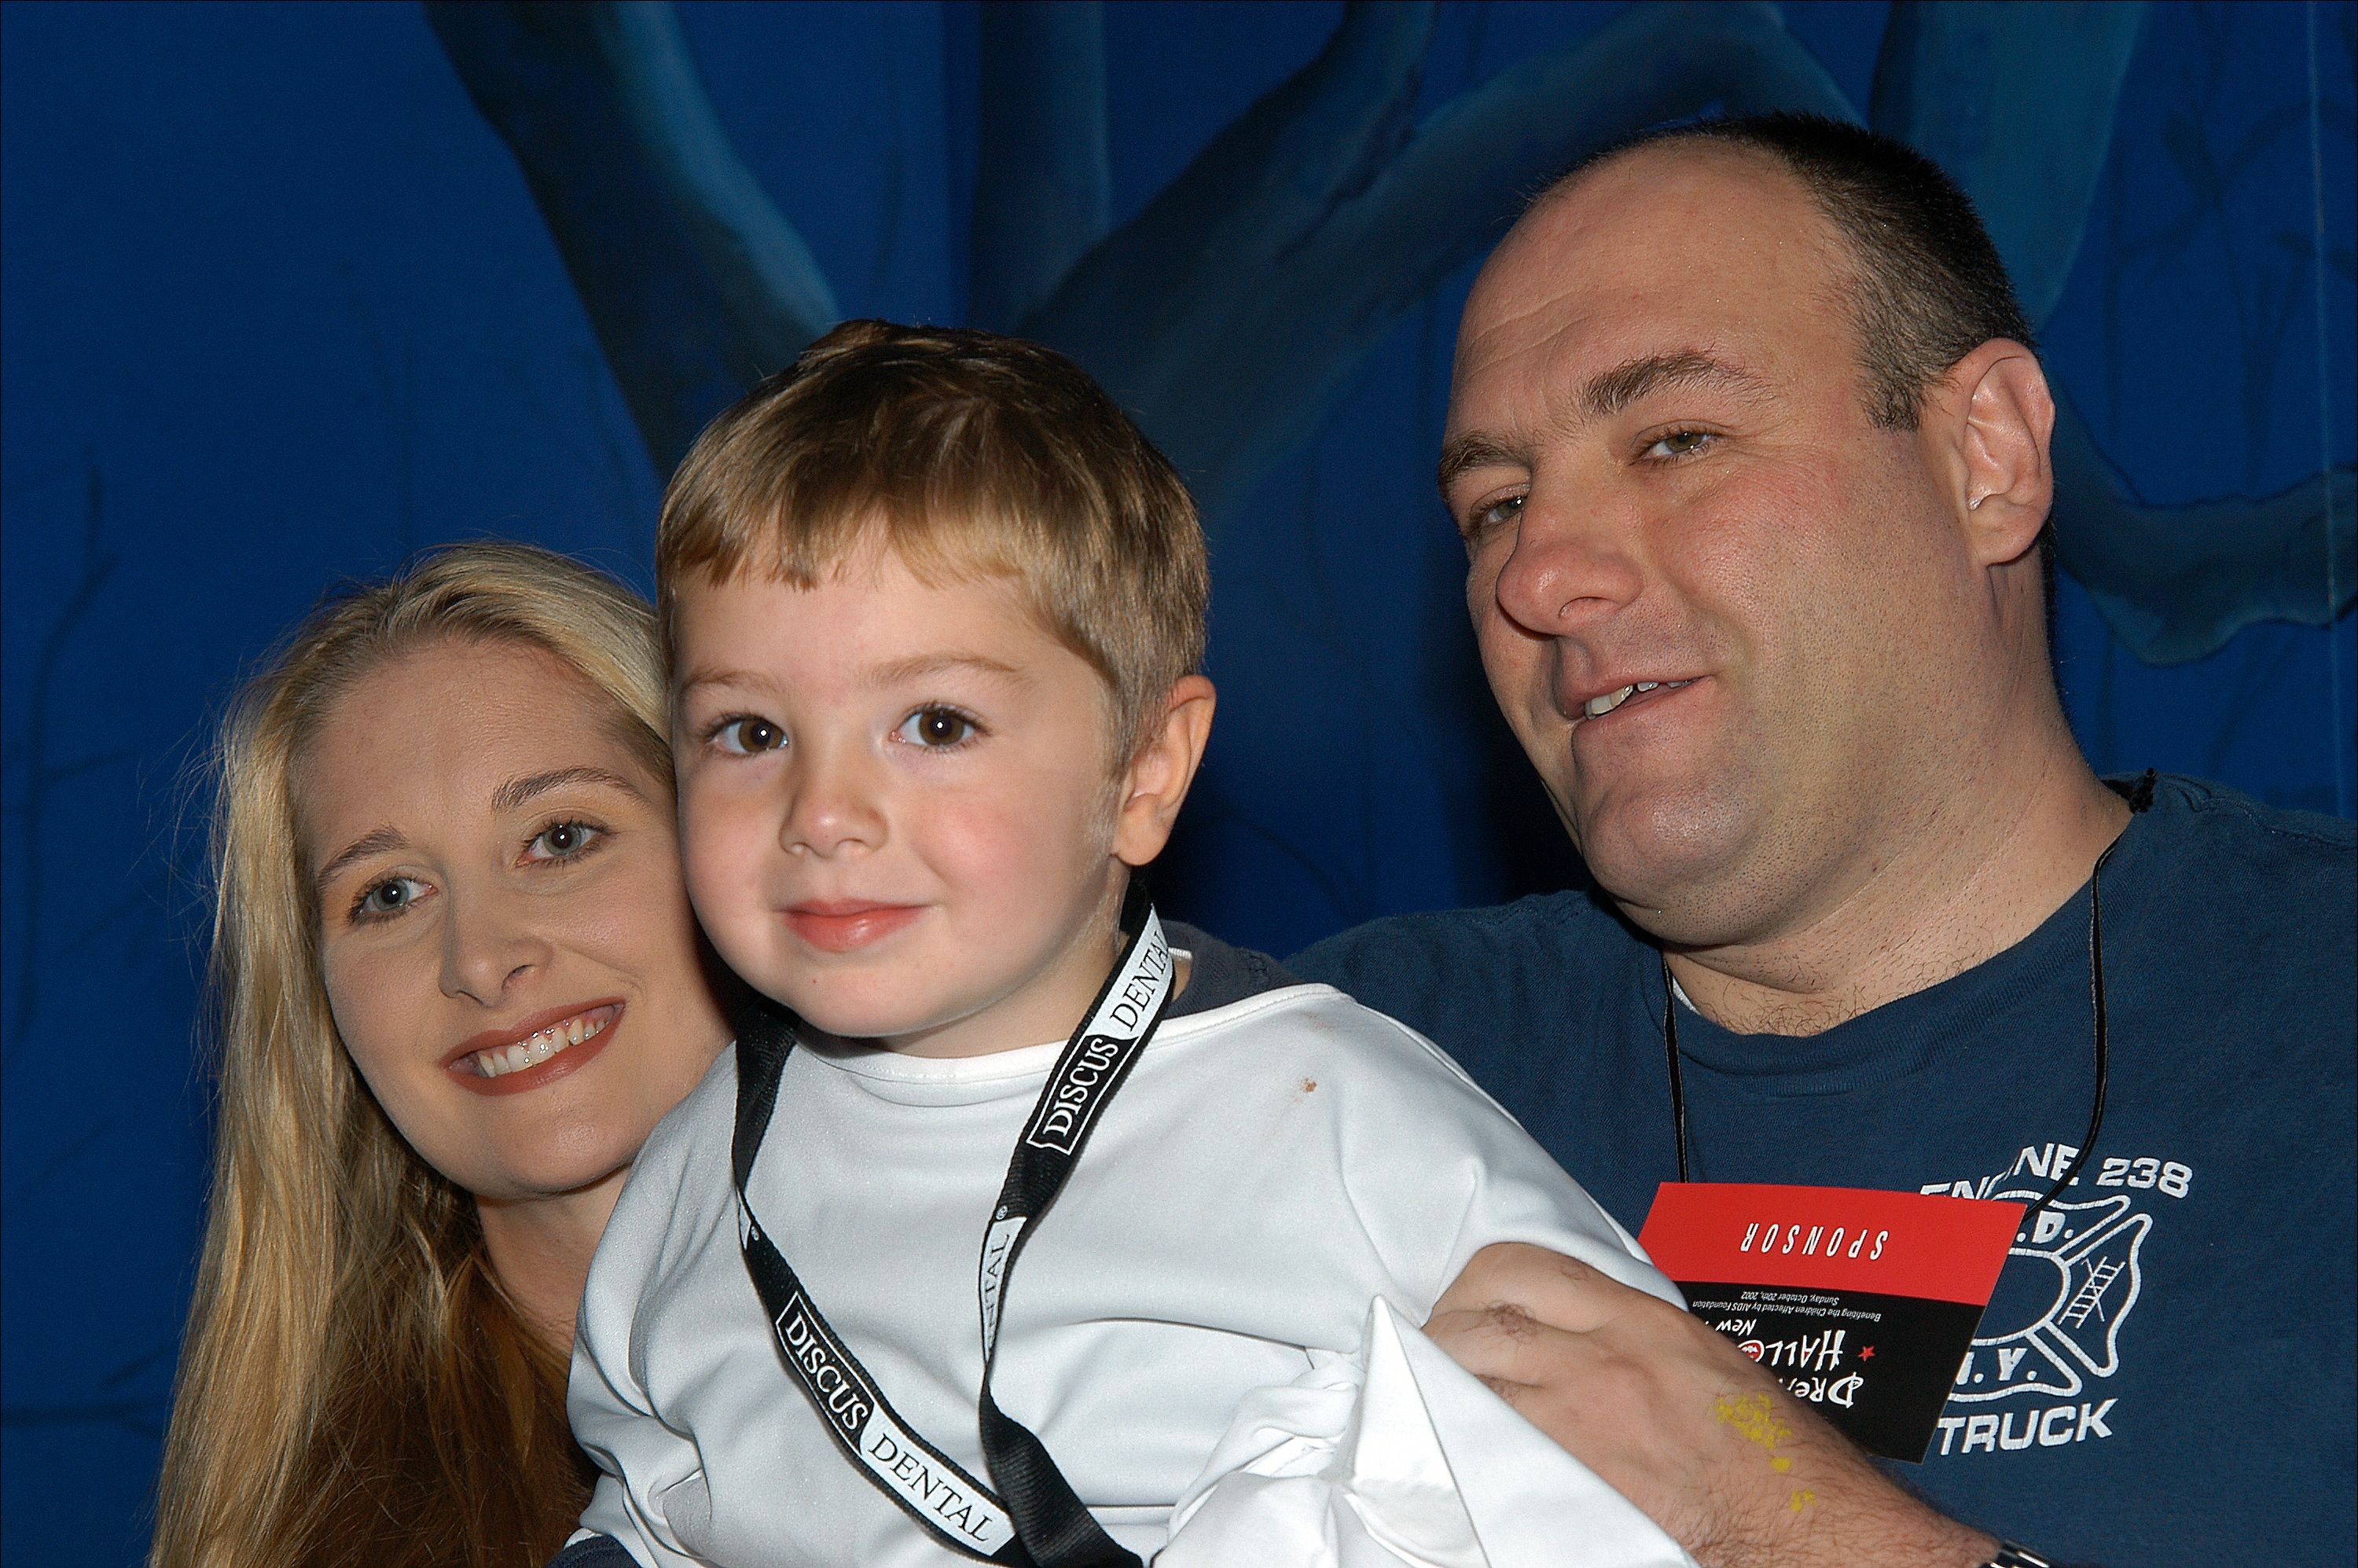 James Gandolfini with his wife, Marcy, and son Michael during the Dream Halloween at Chelsea Piers. | Source: Getty Images